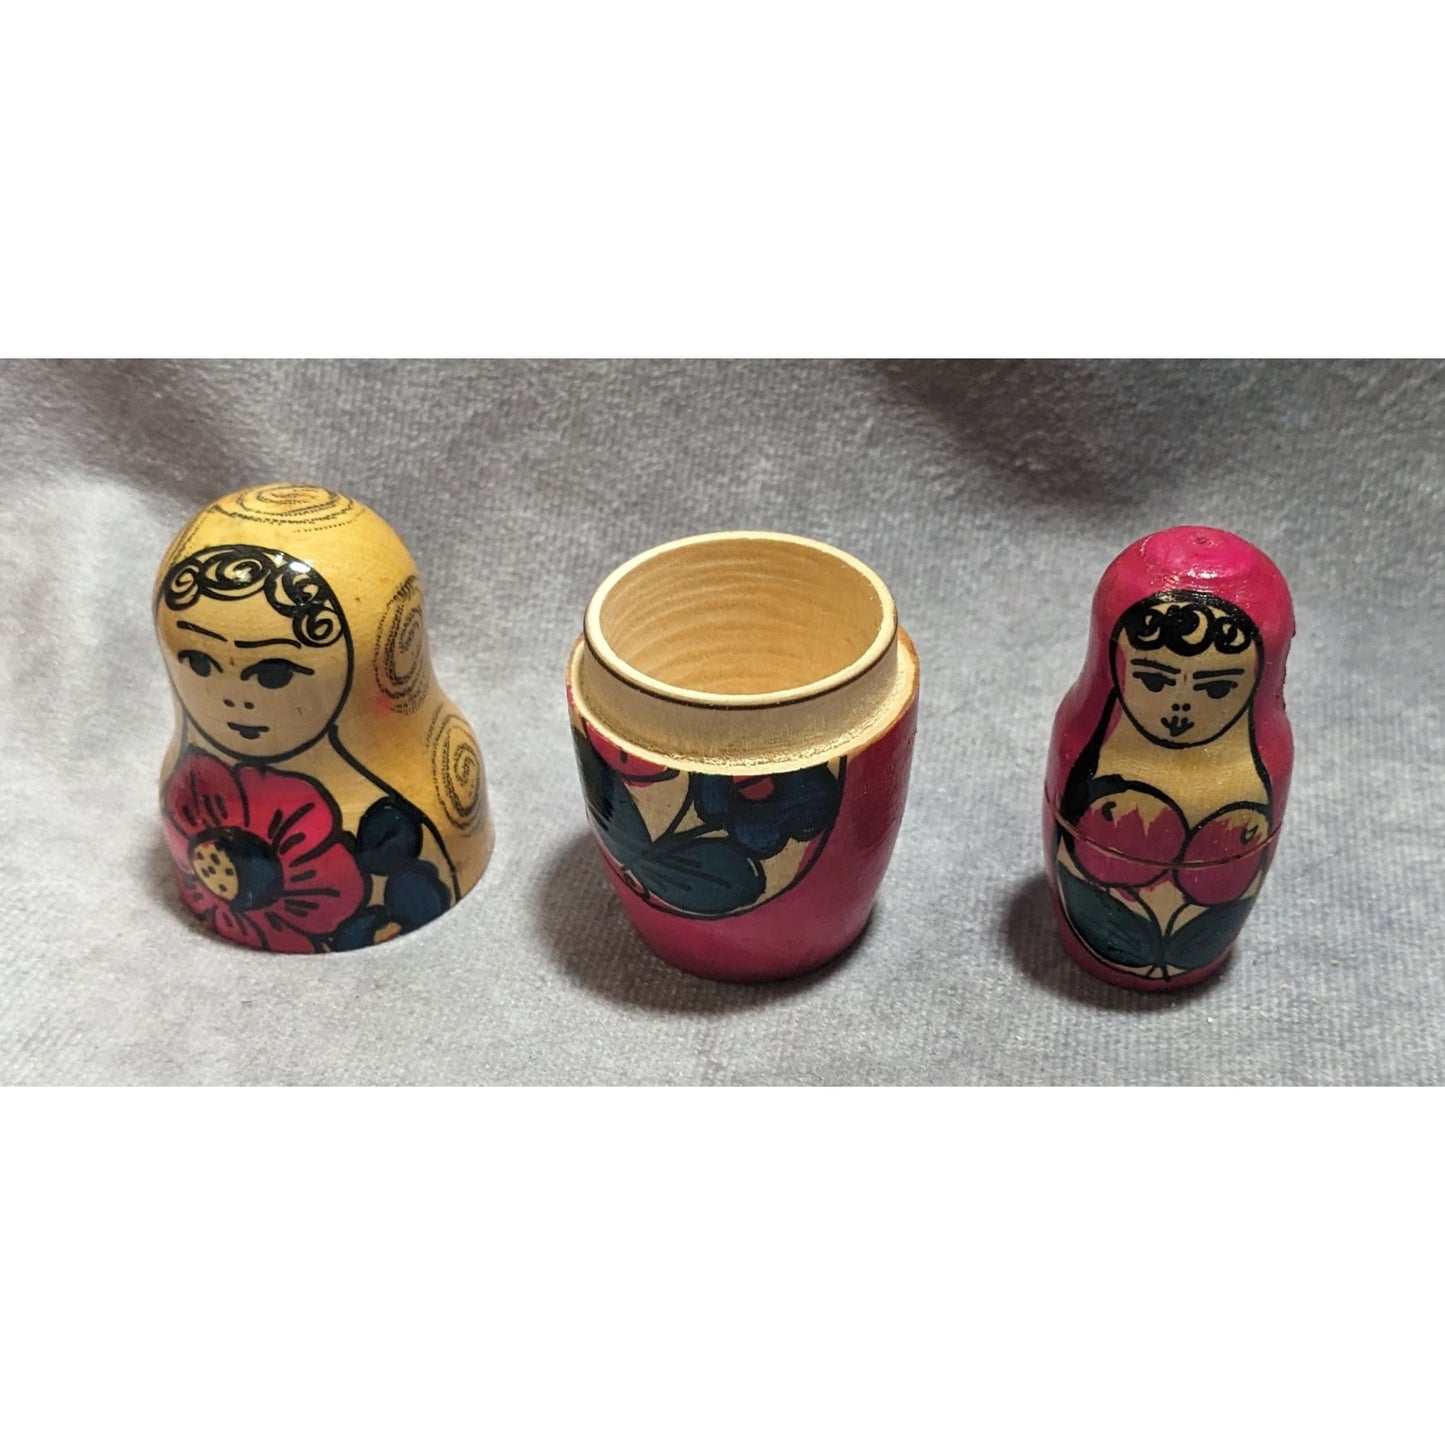 Traditional Hand Painted Russian Wooden Nesting Dolls